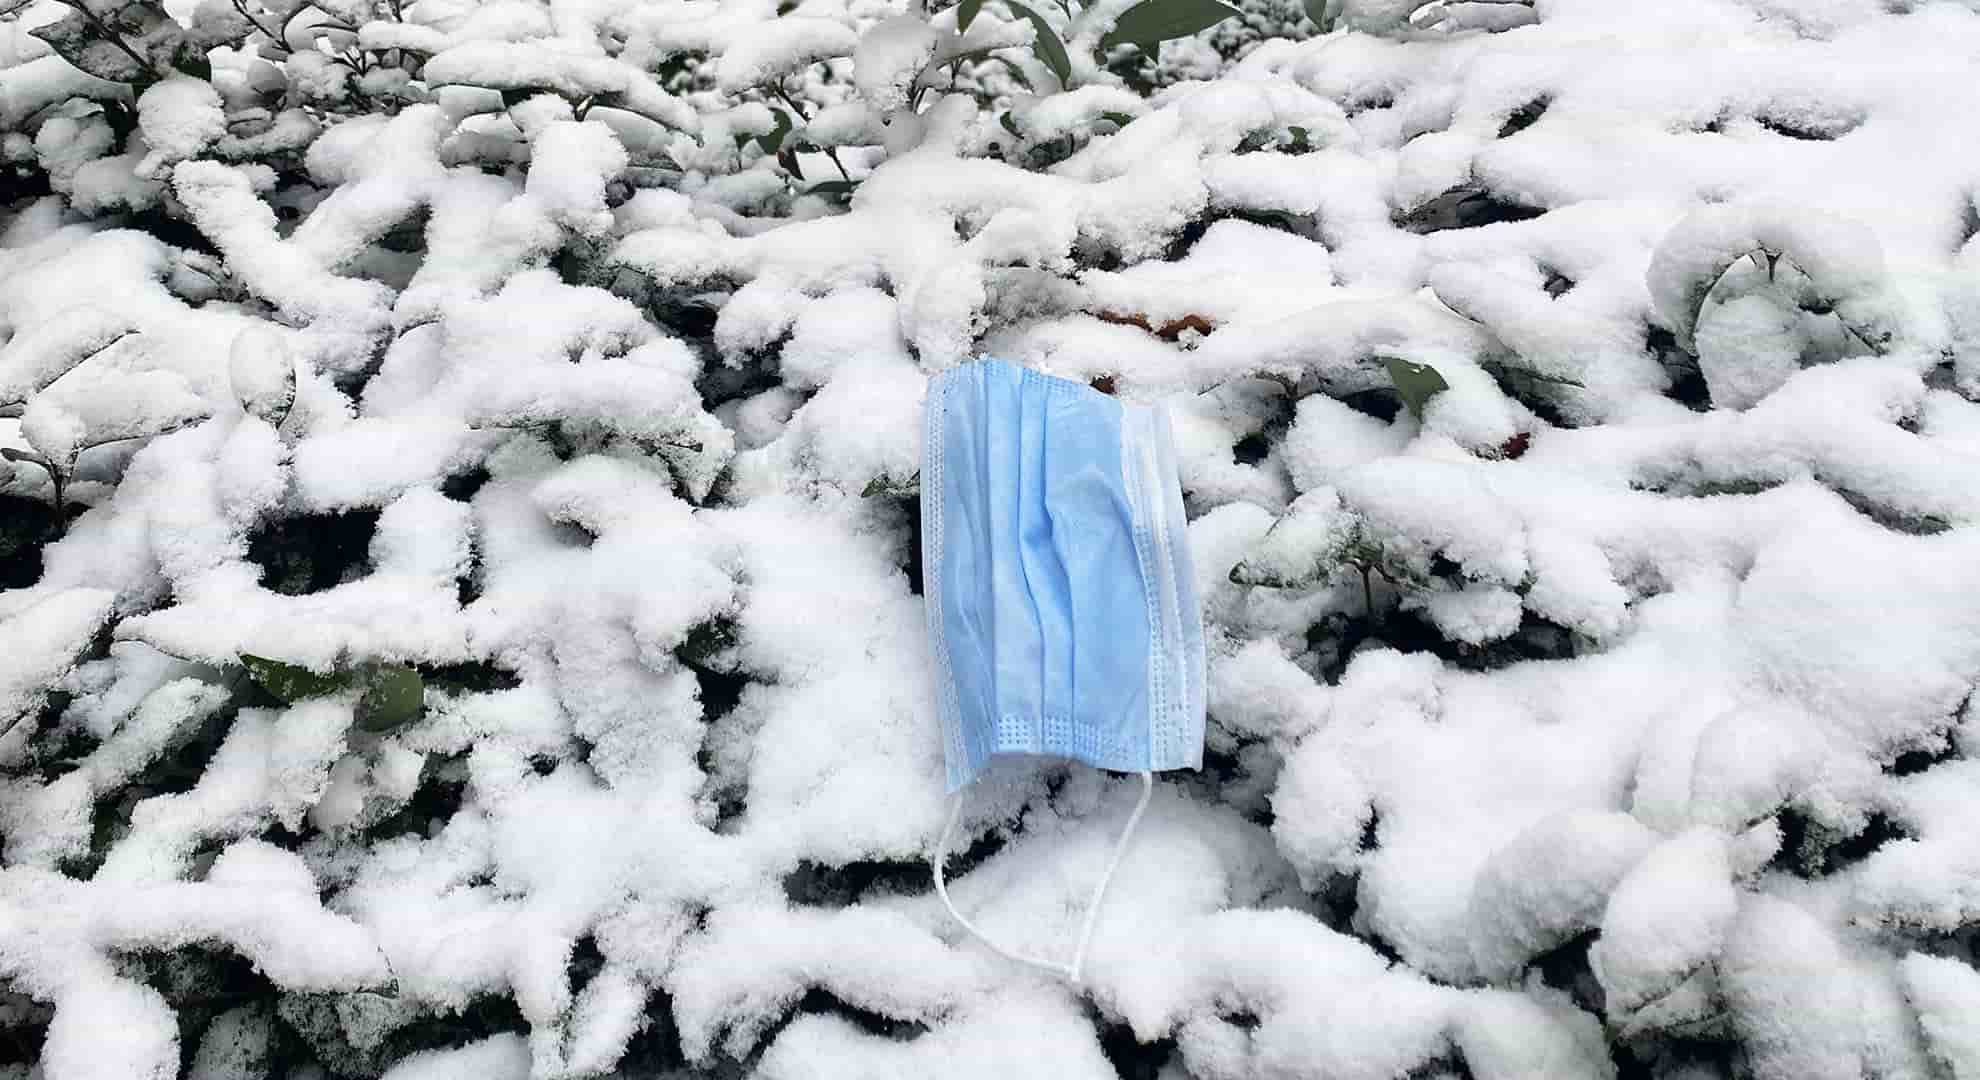 Photo of a single-use face covering littered in the snow.jpeg